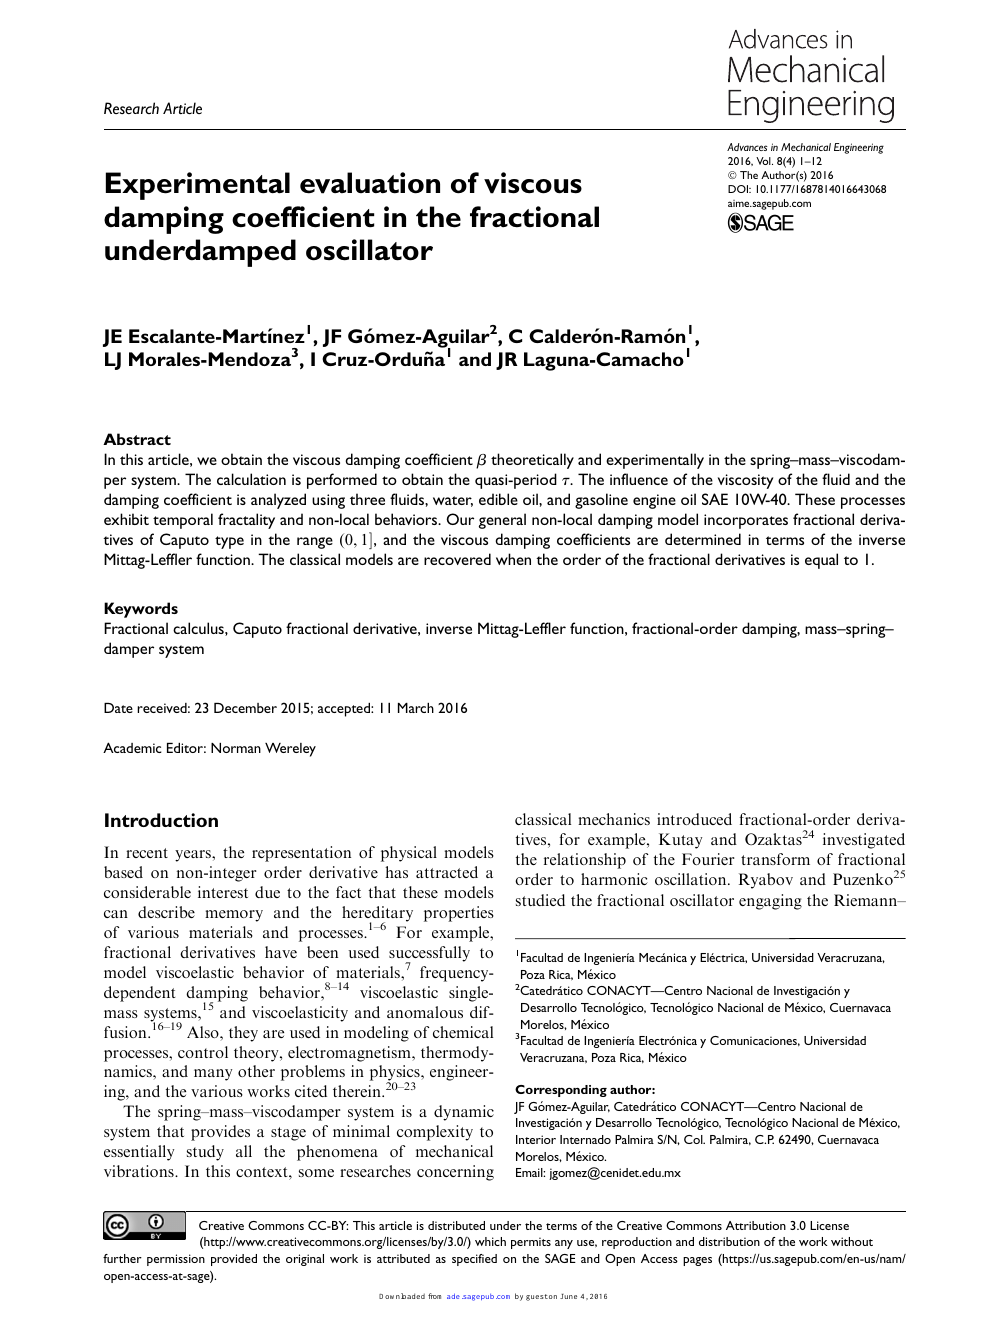 Experimental Evaluation Of Viscous Damping Coefficient In The